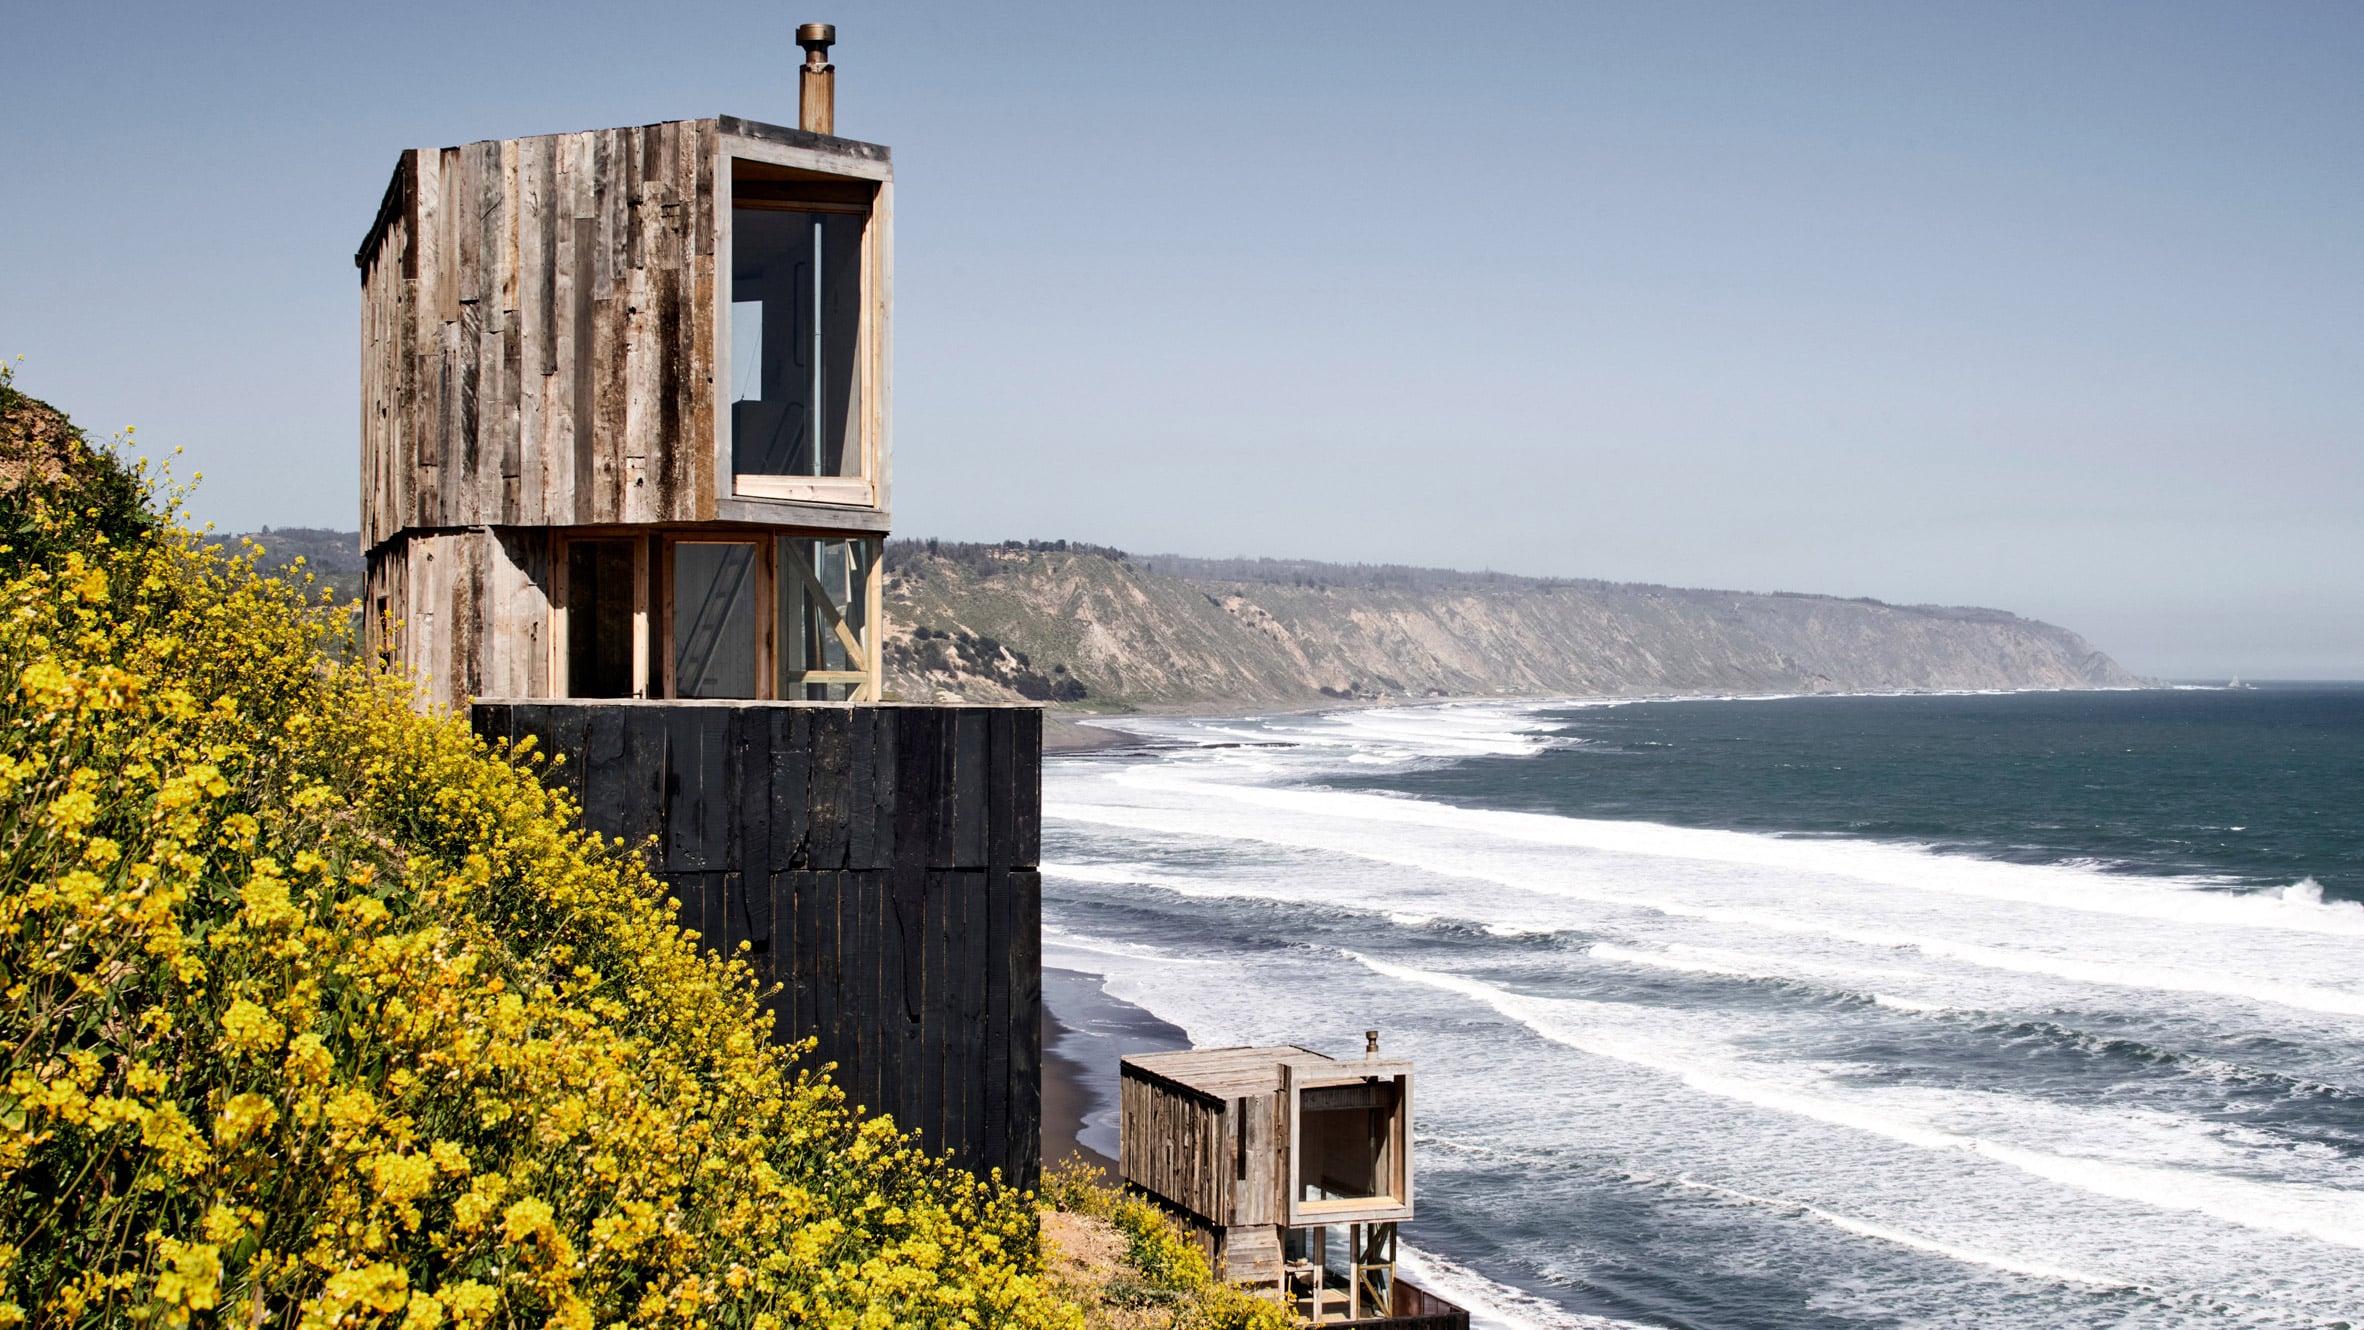 Croxatto and Opazo Architects perches timber-clad cabins on a coastal hillside in Chile